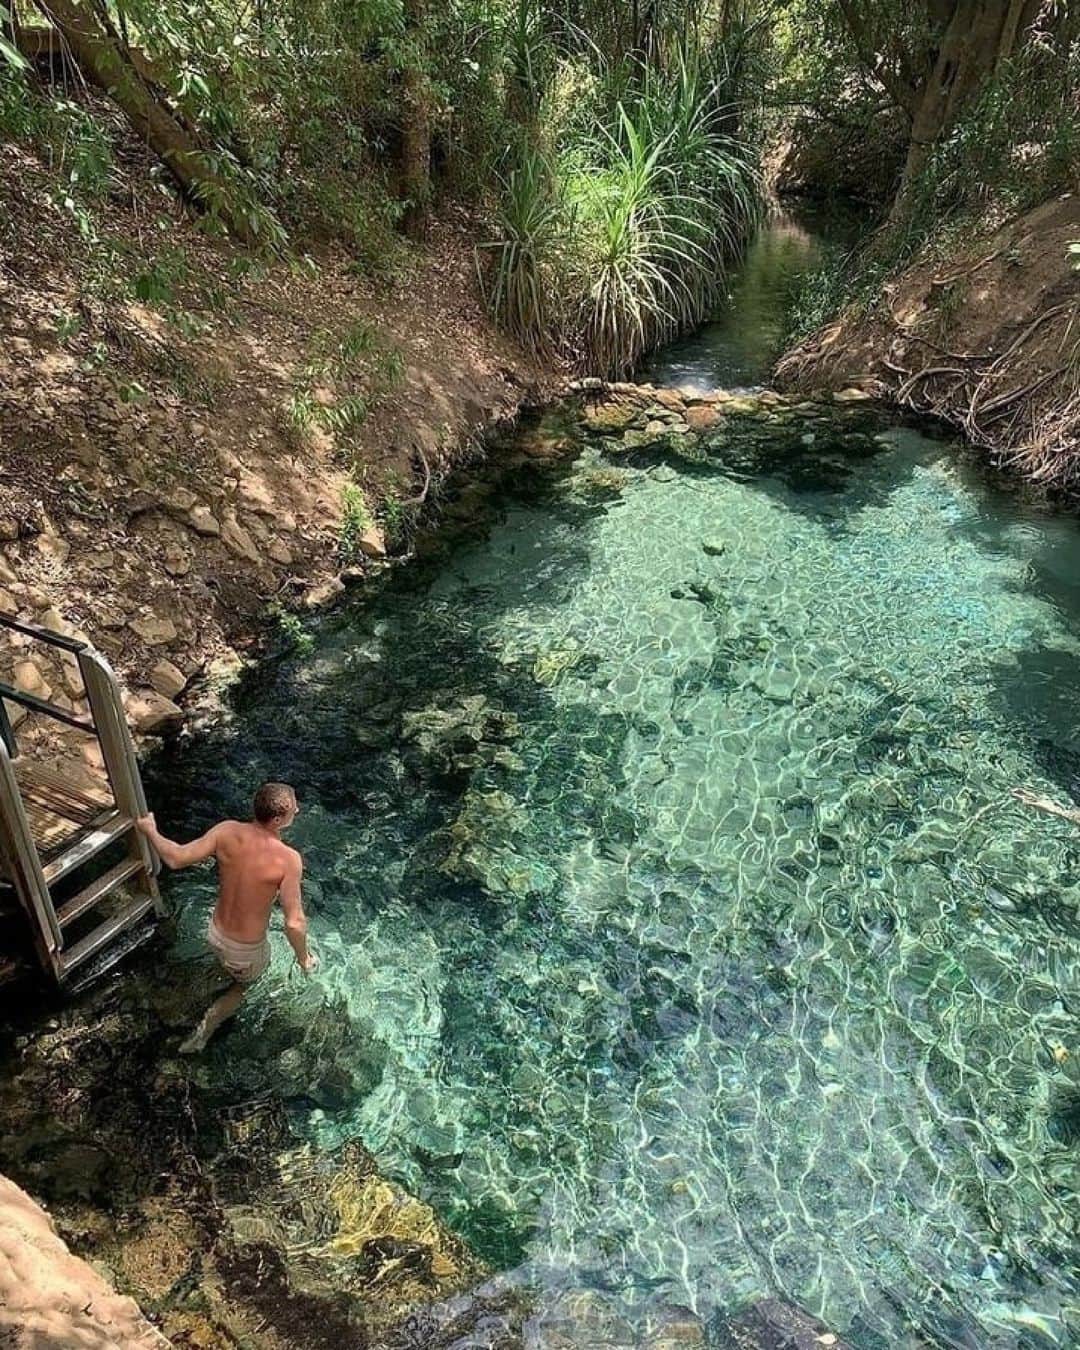 Australiaのインスタグラム：「Yes, please! 😍 The #KatherineHotSprings sure are looking ultra inviting right now. Take a dip in these invigorating natural waters in @visitkatherine, located just over three hours by car from #Darwin in @ntaustralia 🚗 After swimming to your heart's content, check into the stylish @cicadalodge before taking to the gorges of Jawoyn Country with @nitmiluktours. You'll cruise beneath towering cliff faces and hear spiritual stories as the sun sets over the rugged landscape🌅 (📸: @laplivin)   #SeeAustralia #ComeAndSayGday #TourismTopEnd #VisitKatherine  ID: A person entering a clear, turquoise hot spring surrounded by trees with the sun reflecting on the water.」